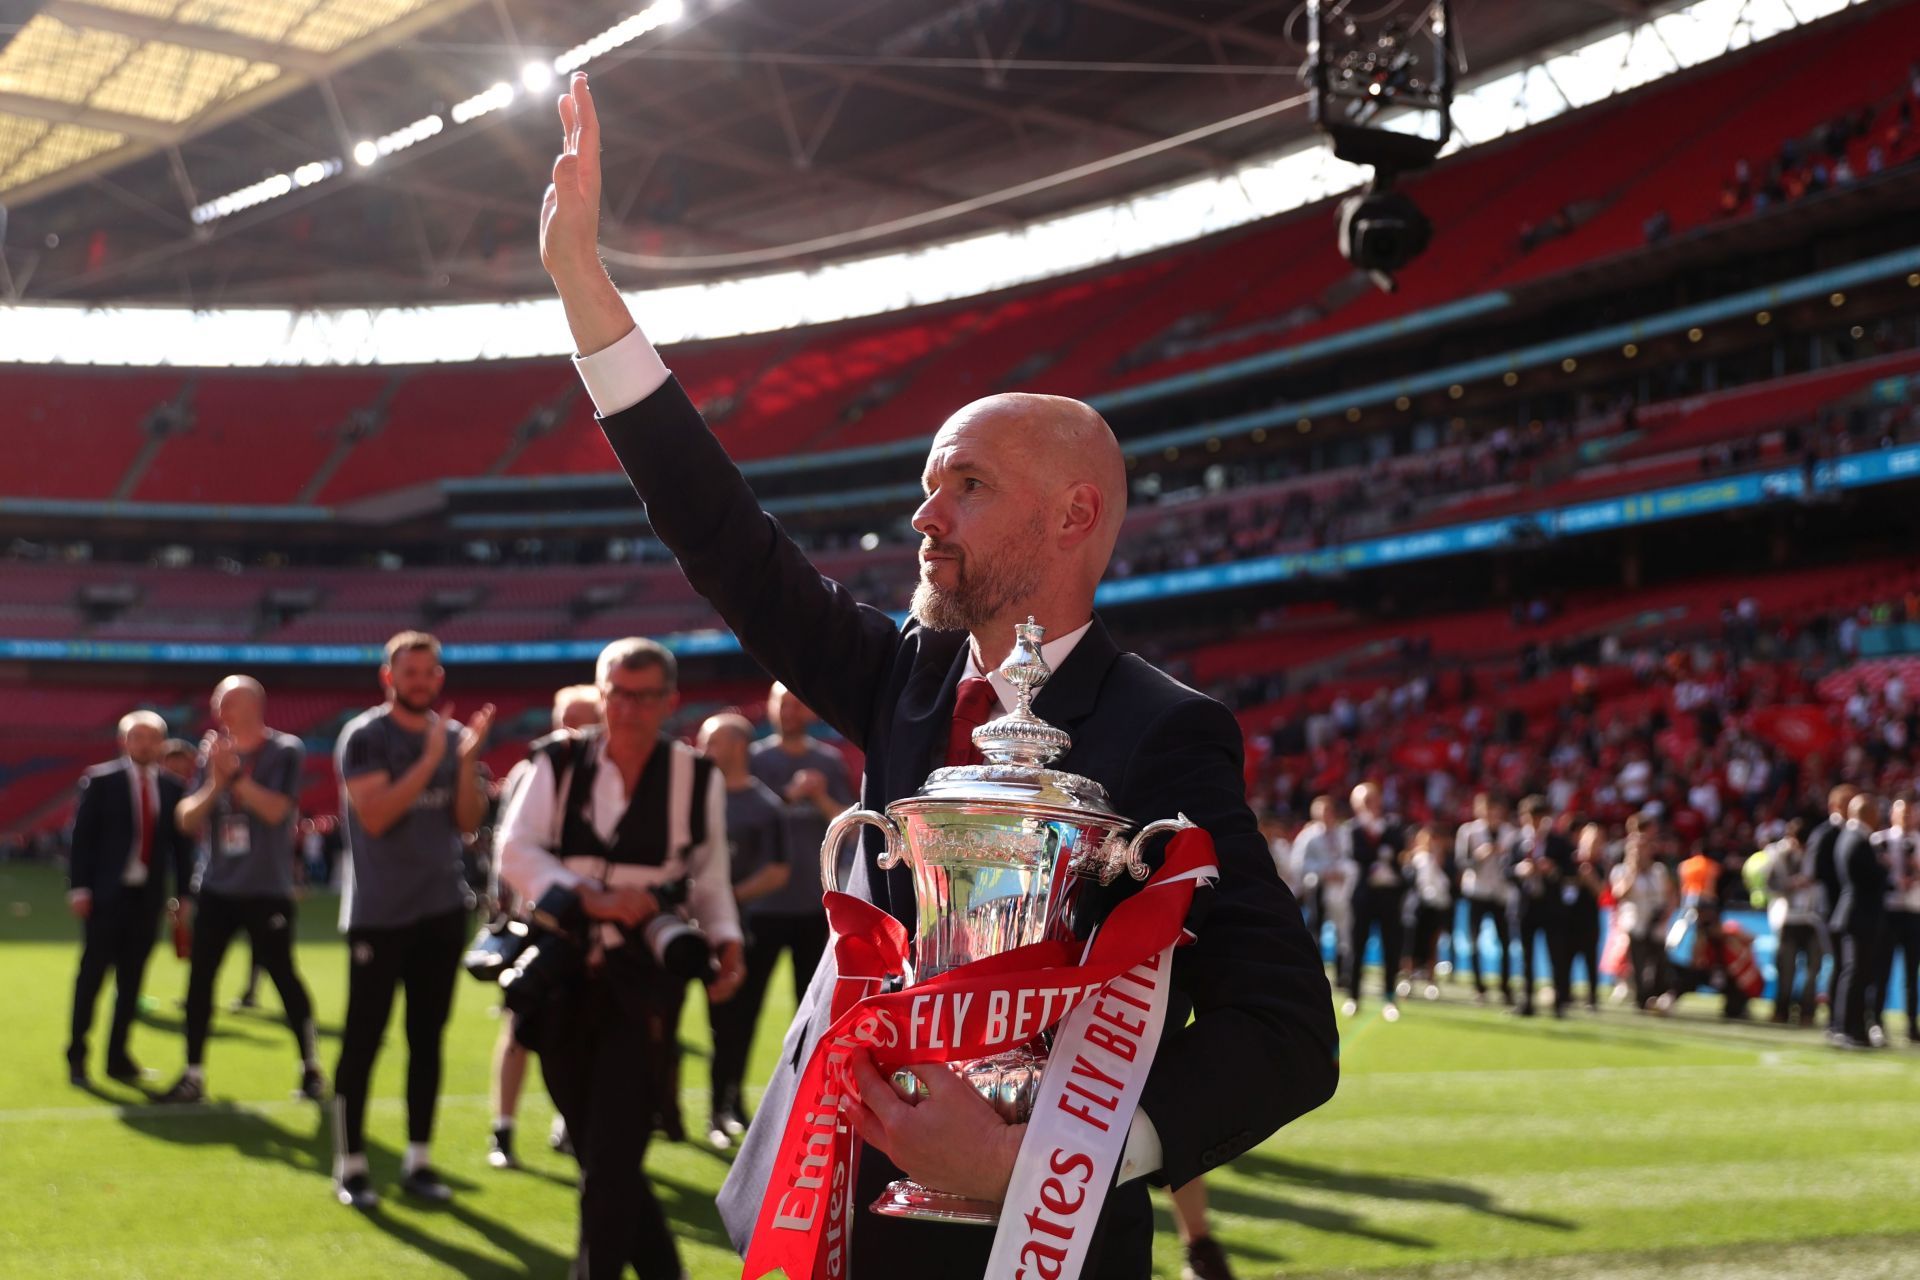 ten Hag orchestrated a stunning FA Cup win.